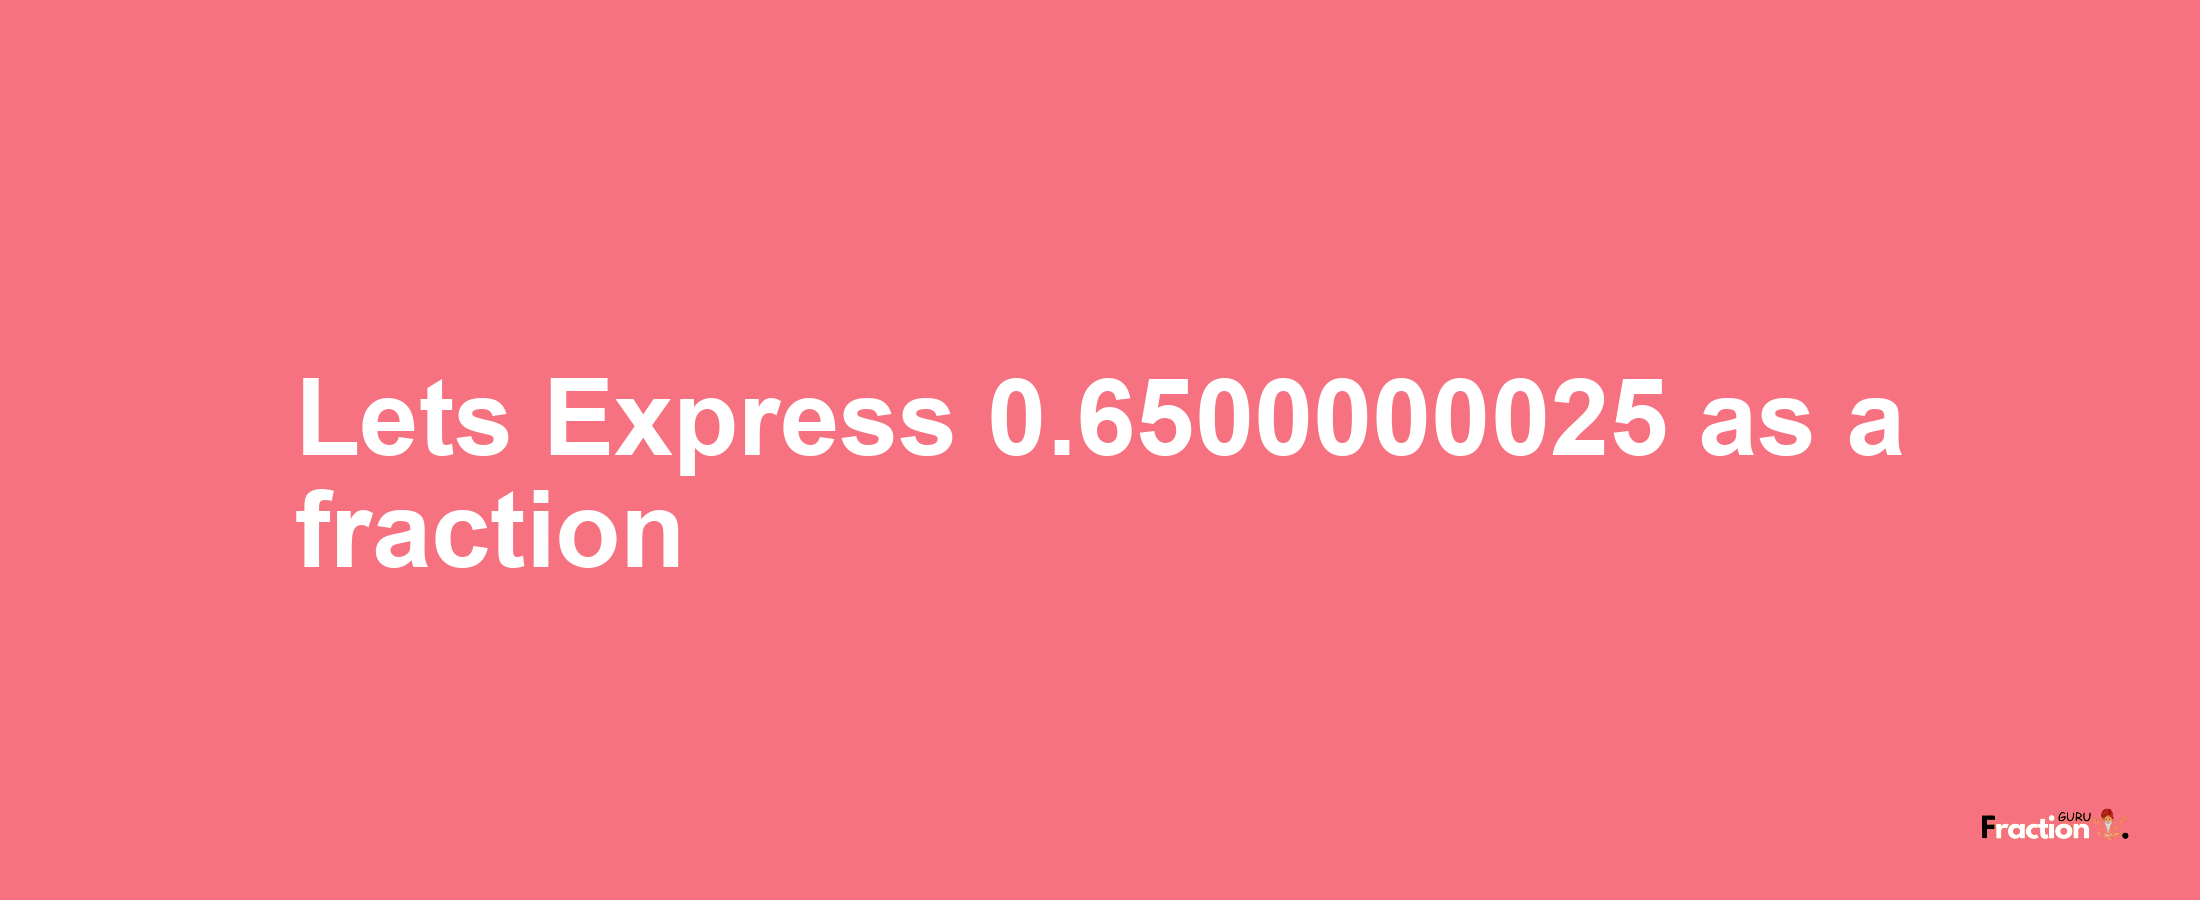 Lets Express 0.6500000025 as afraction